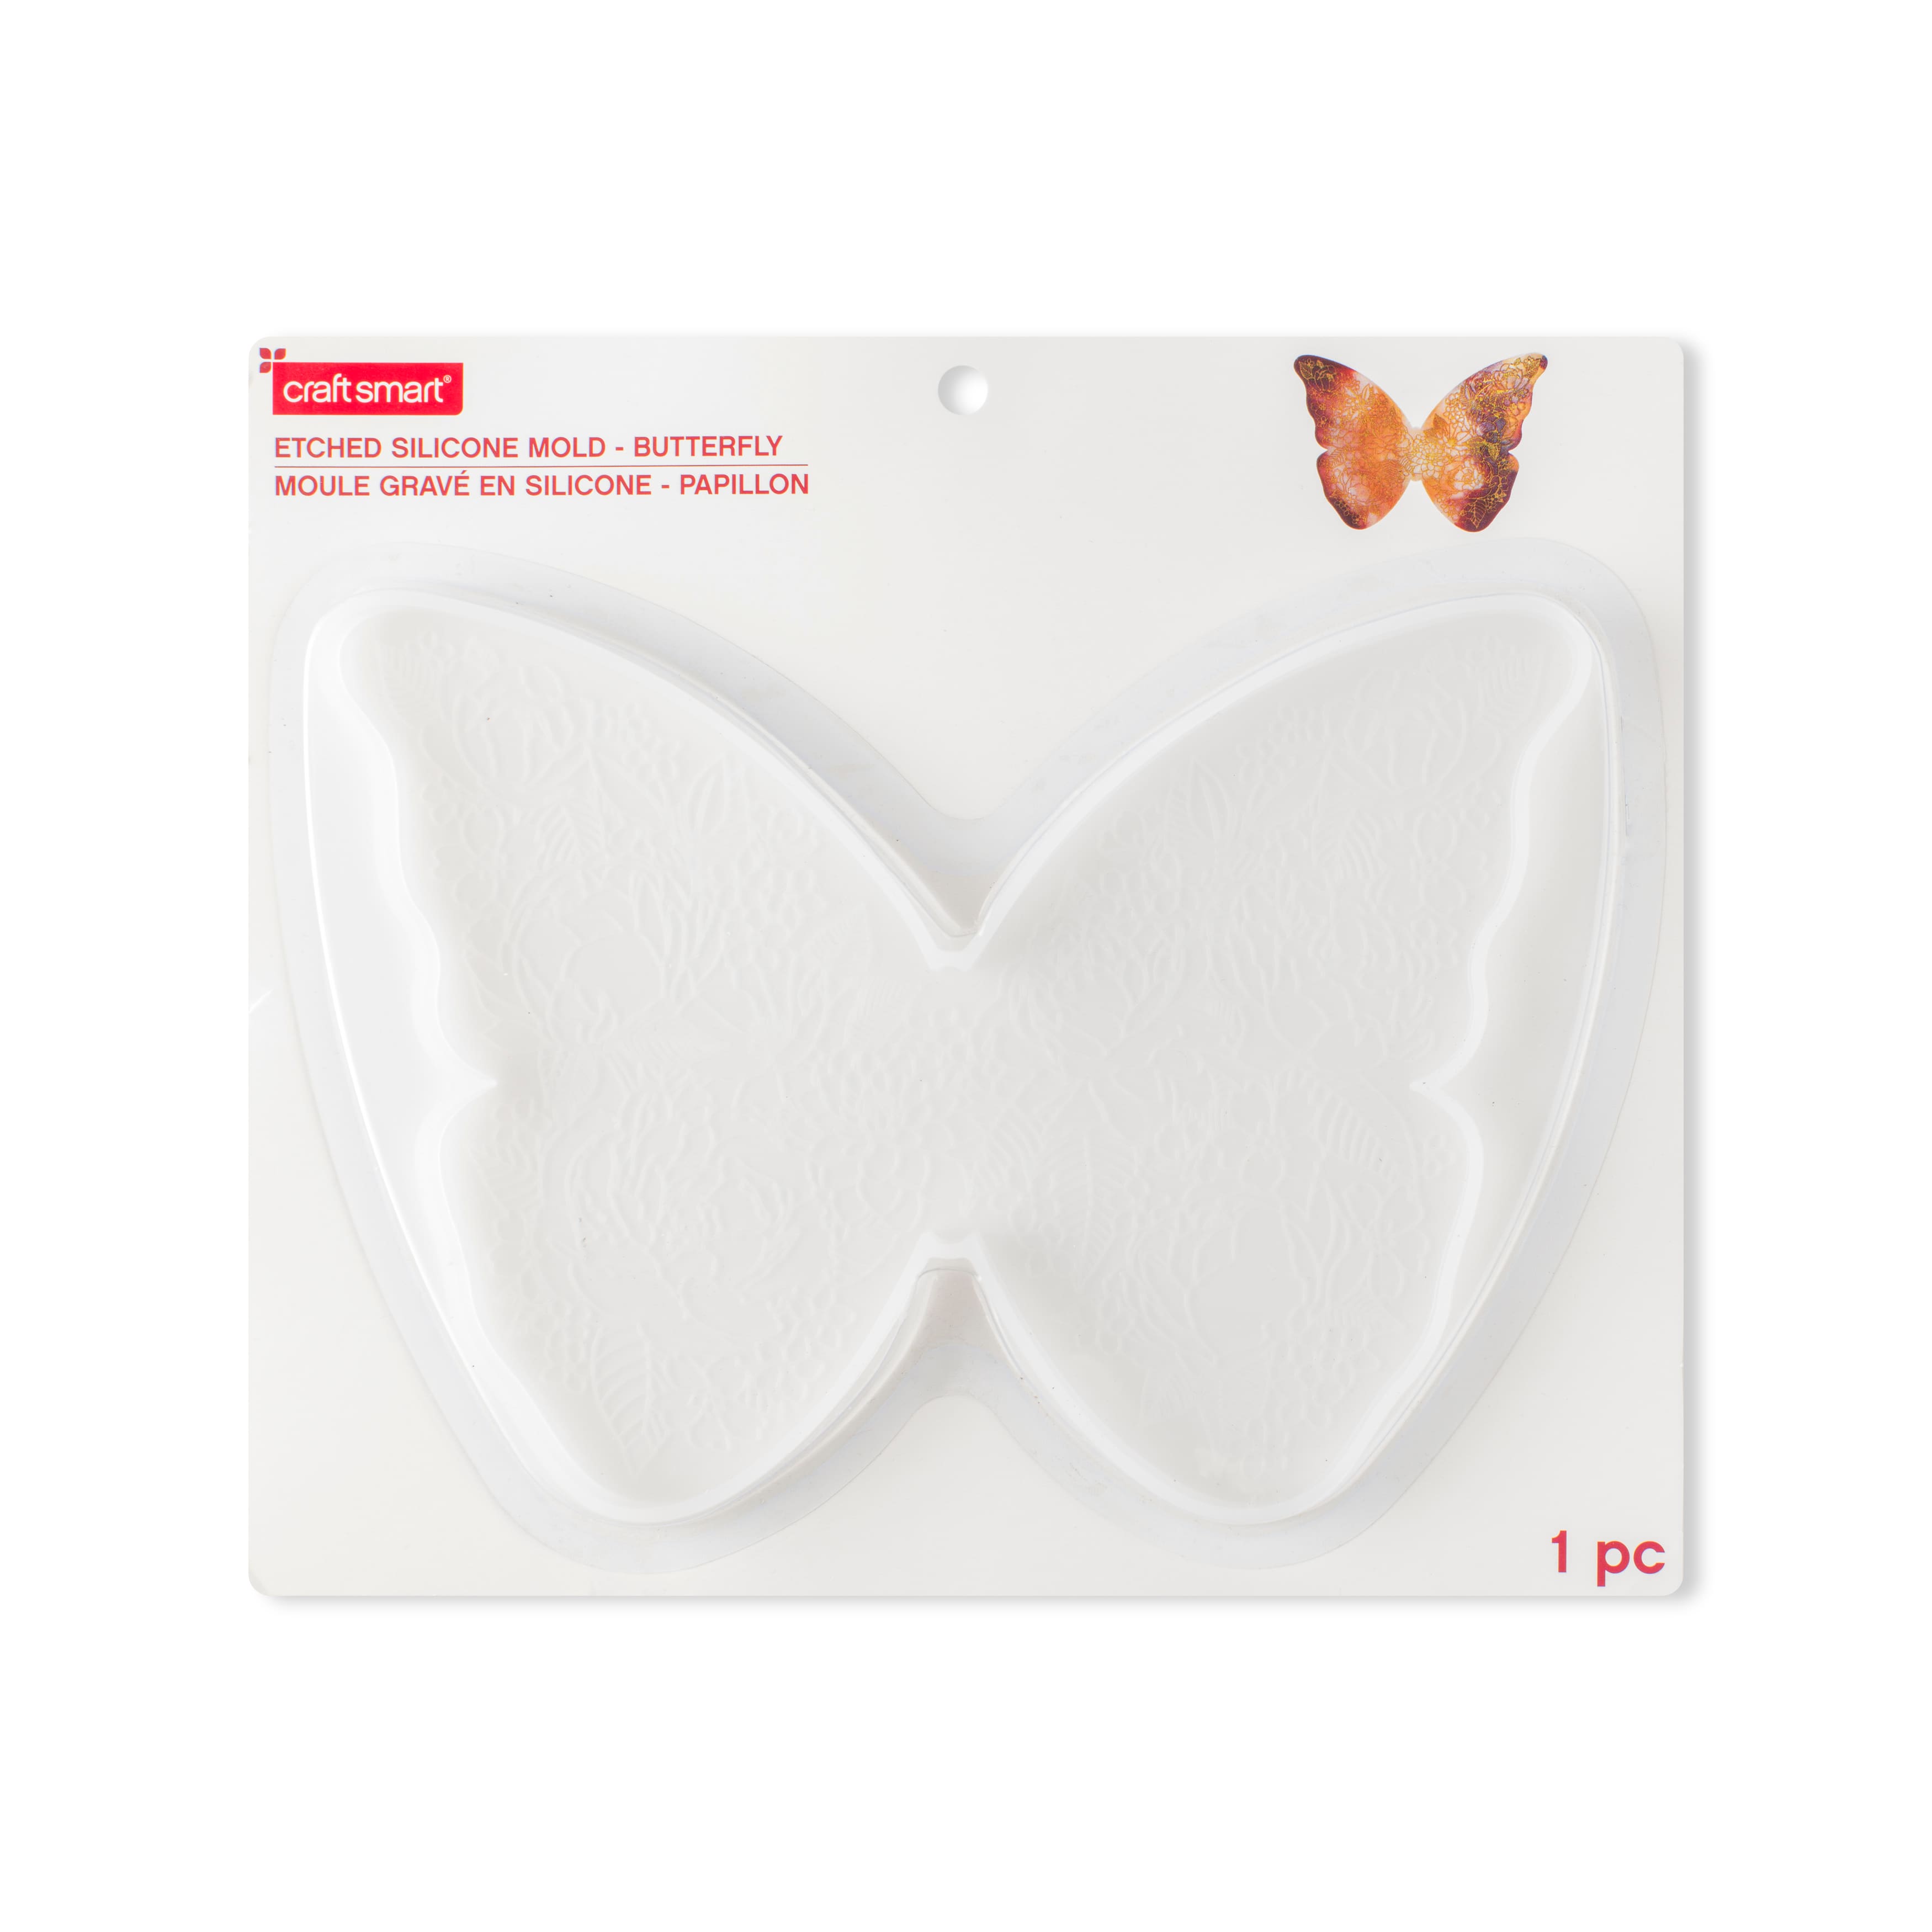 Butterfly Etched Silicone Smart® Mold by Michaels | Craft